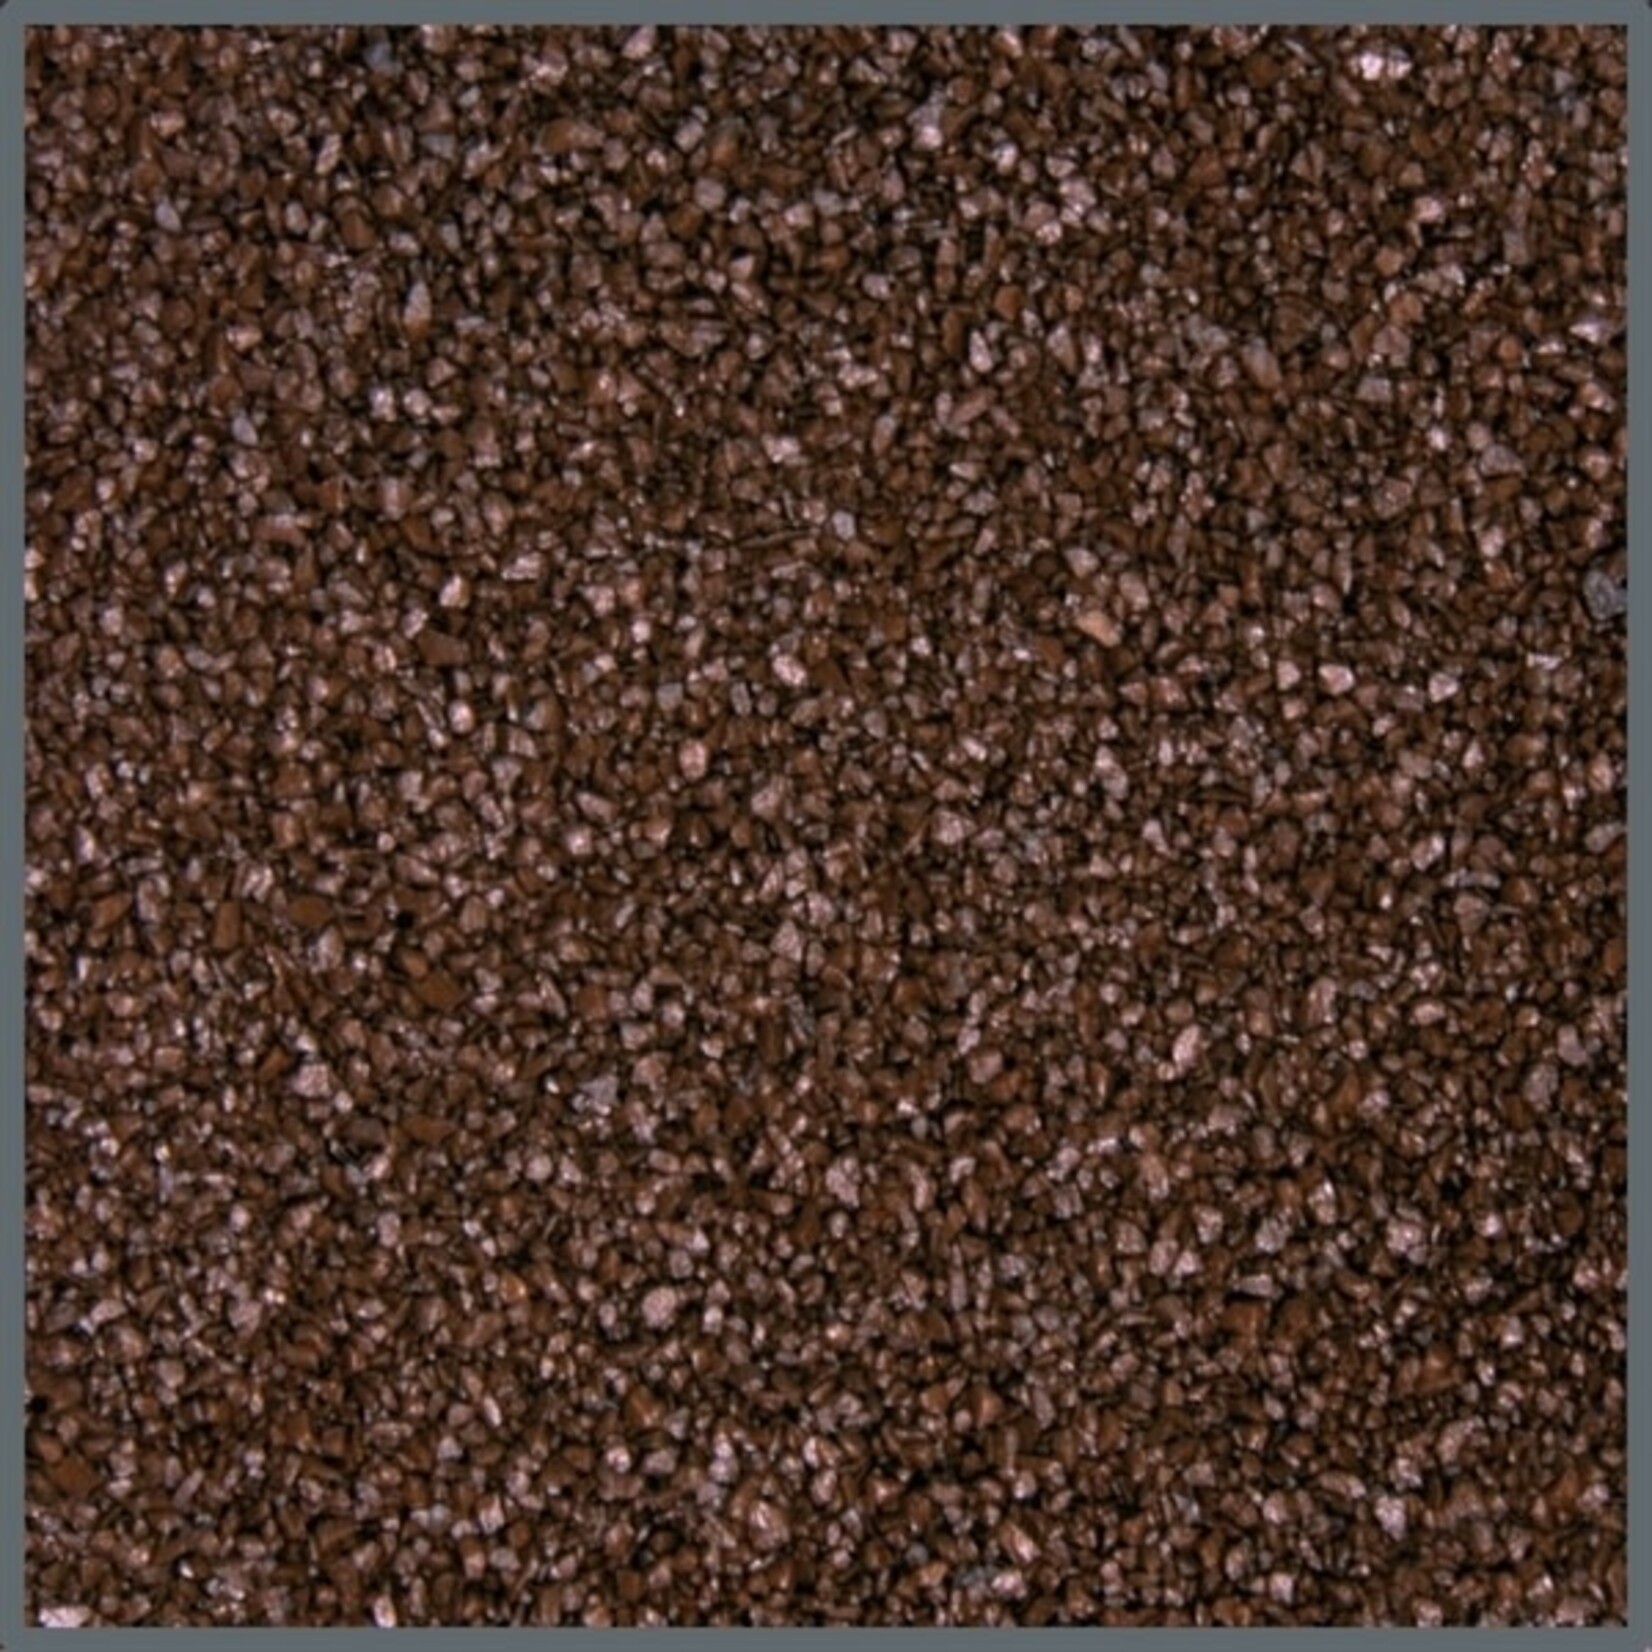 Dupla Ground colour brown chocolate 0.5-1.4 mm 5 kg